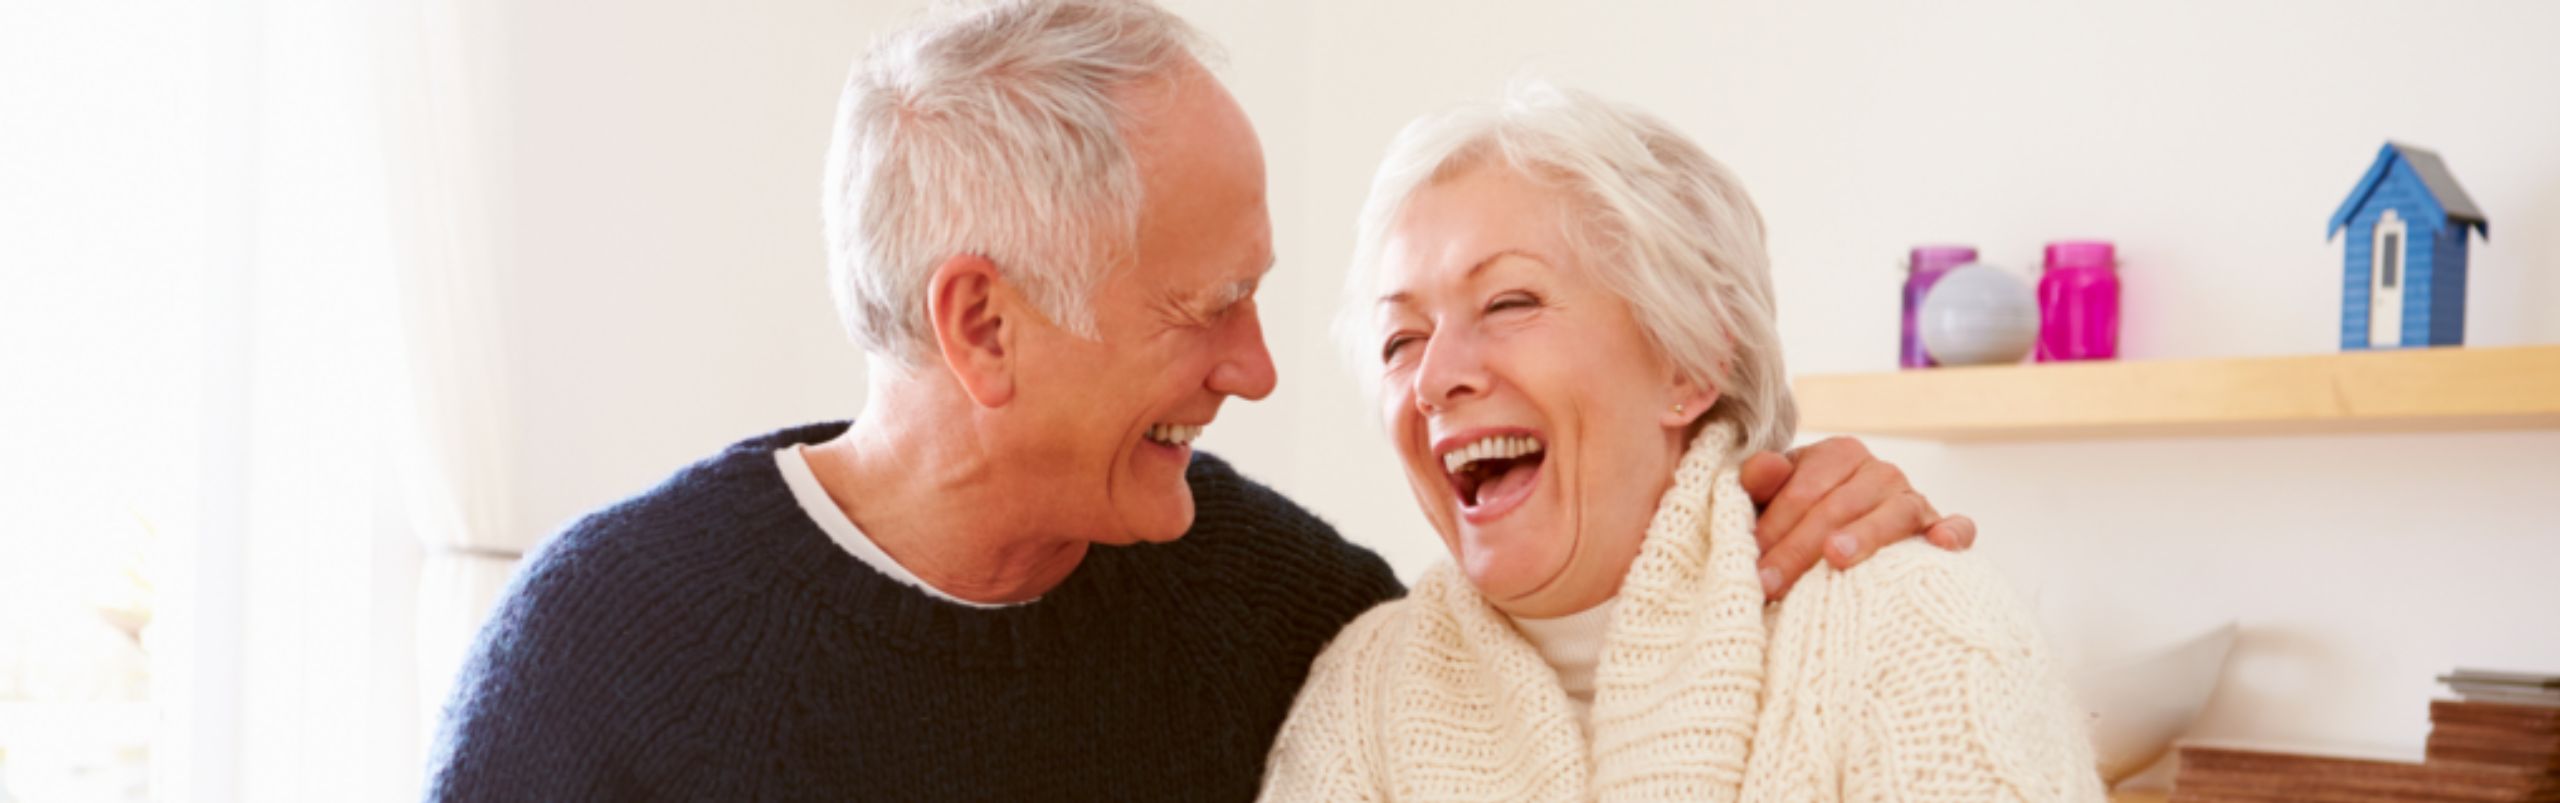 senior couple with man's arm around woman laughing in apartment homes